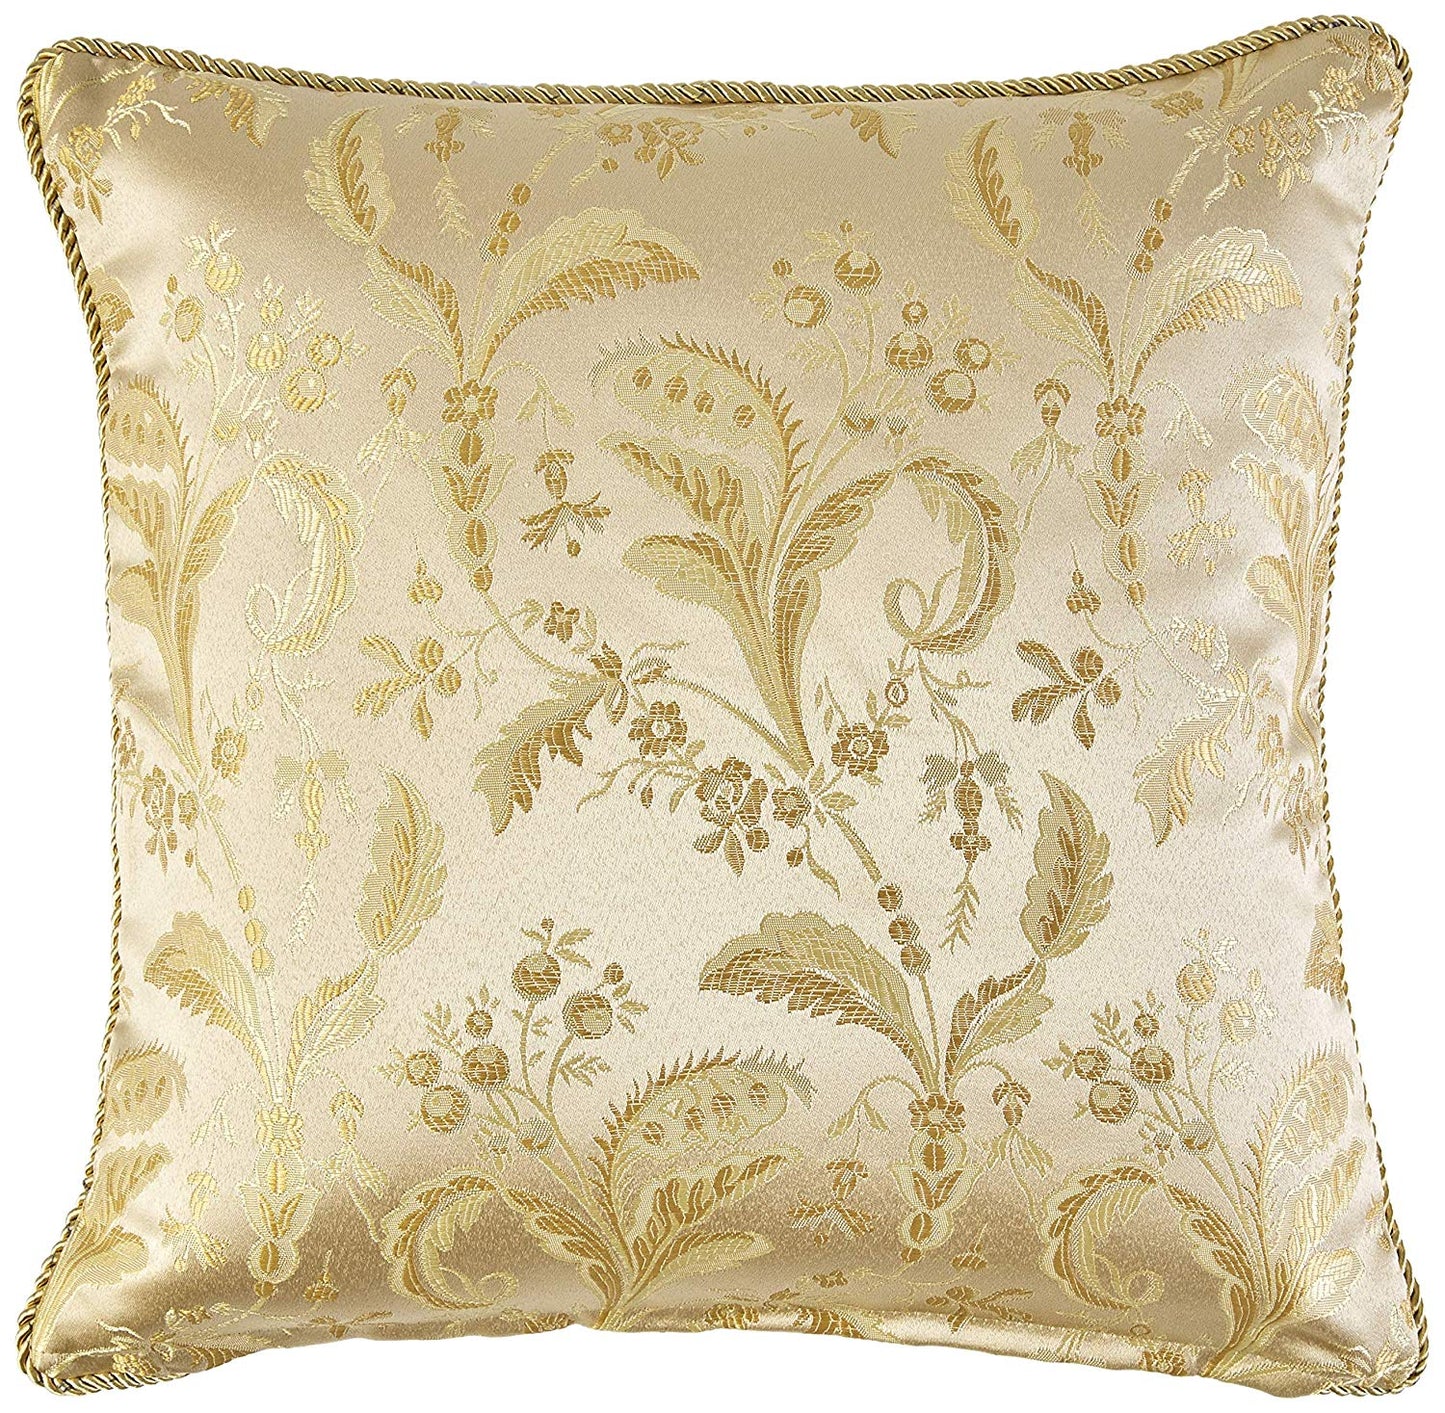 Luxury Damask Decorative Throw Pillow Covers